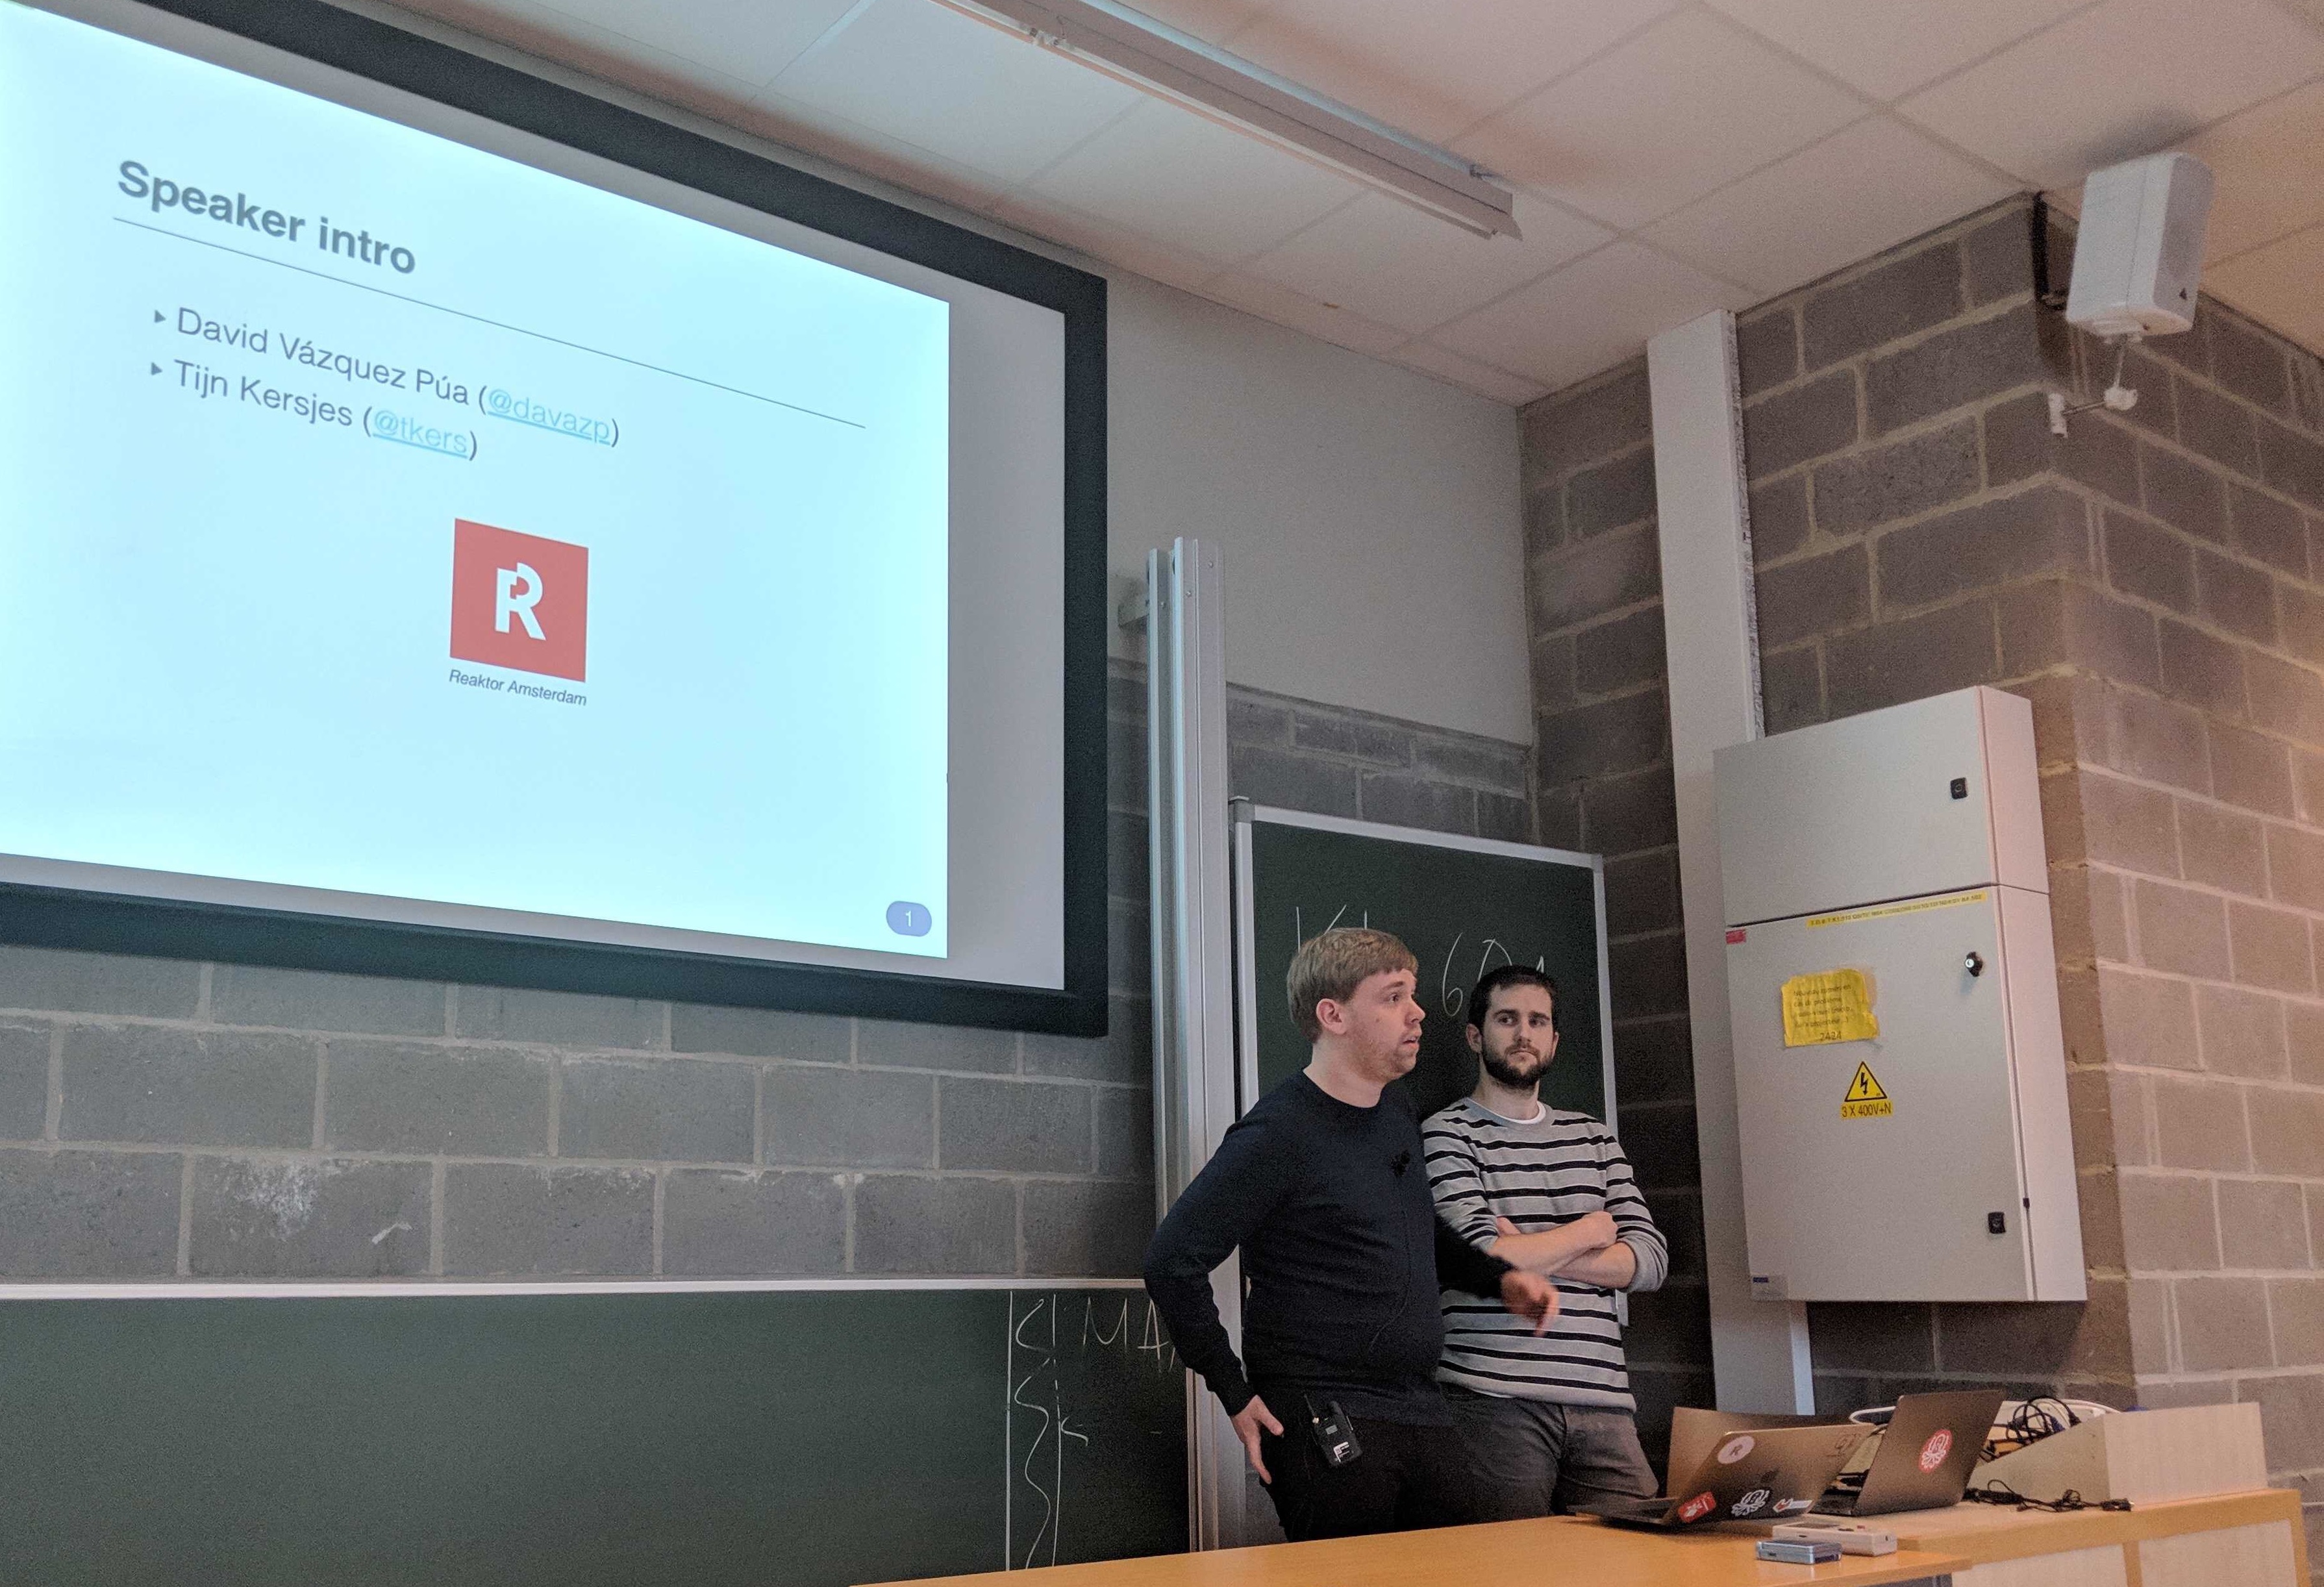 A photo of Tijn and David doing a conference talk